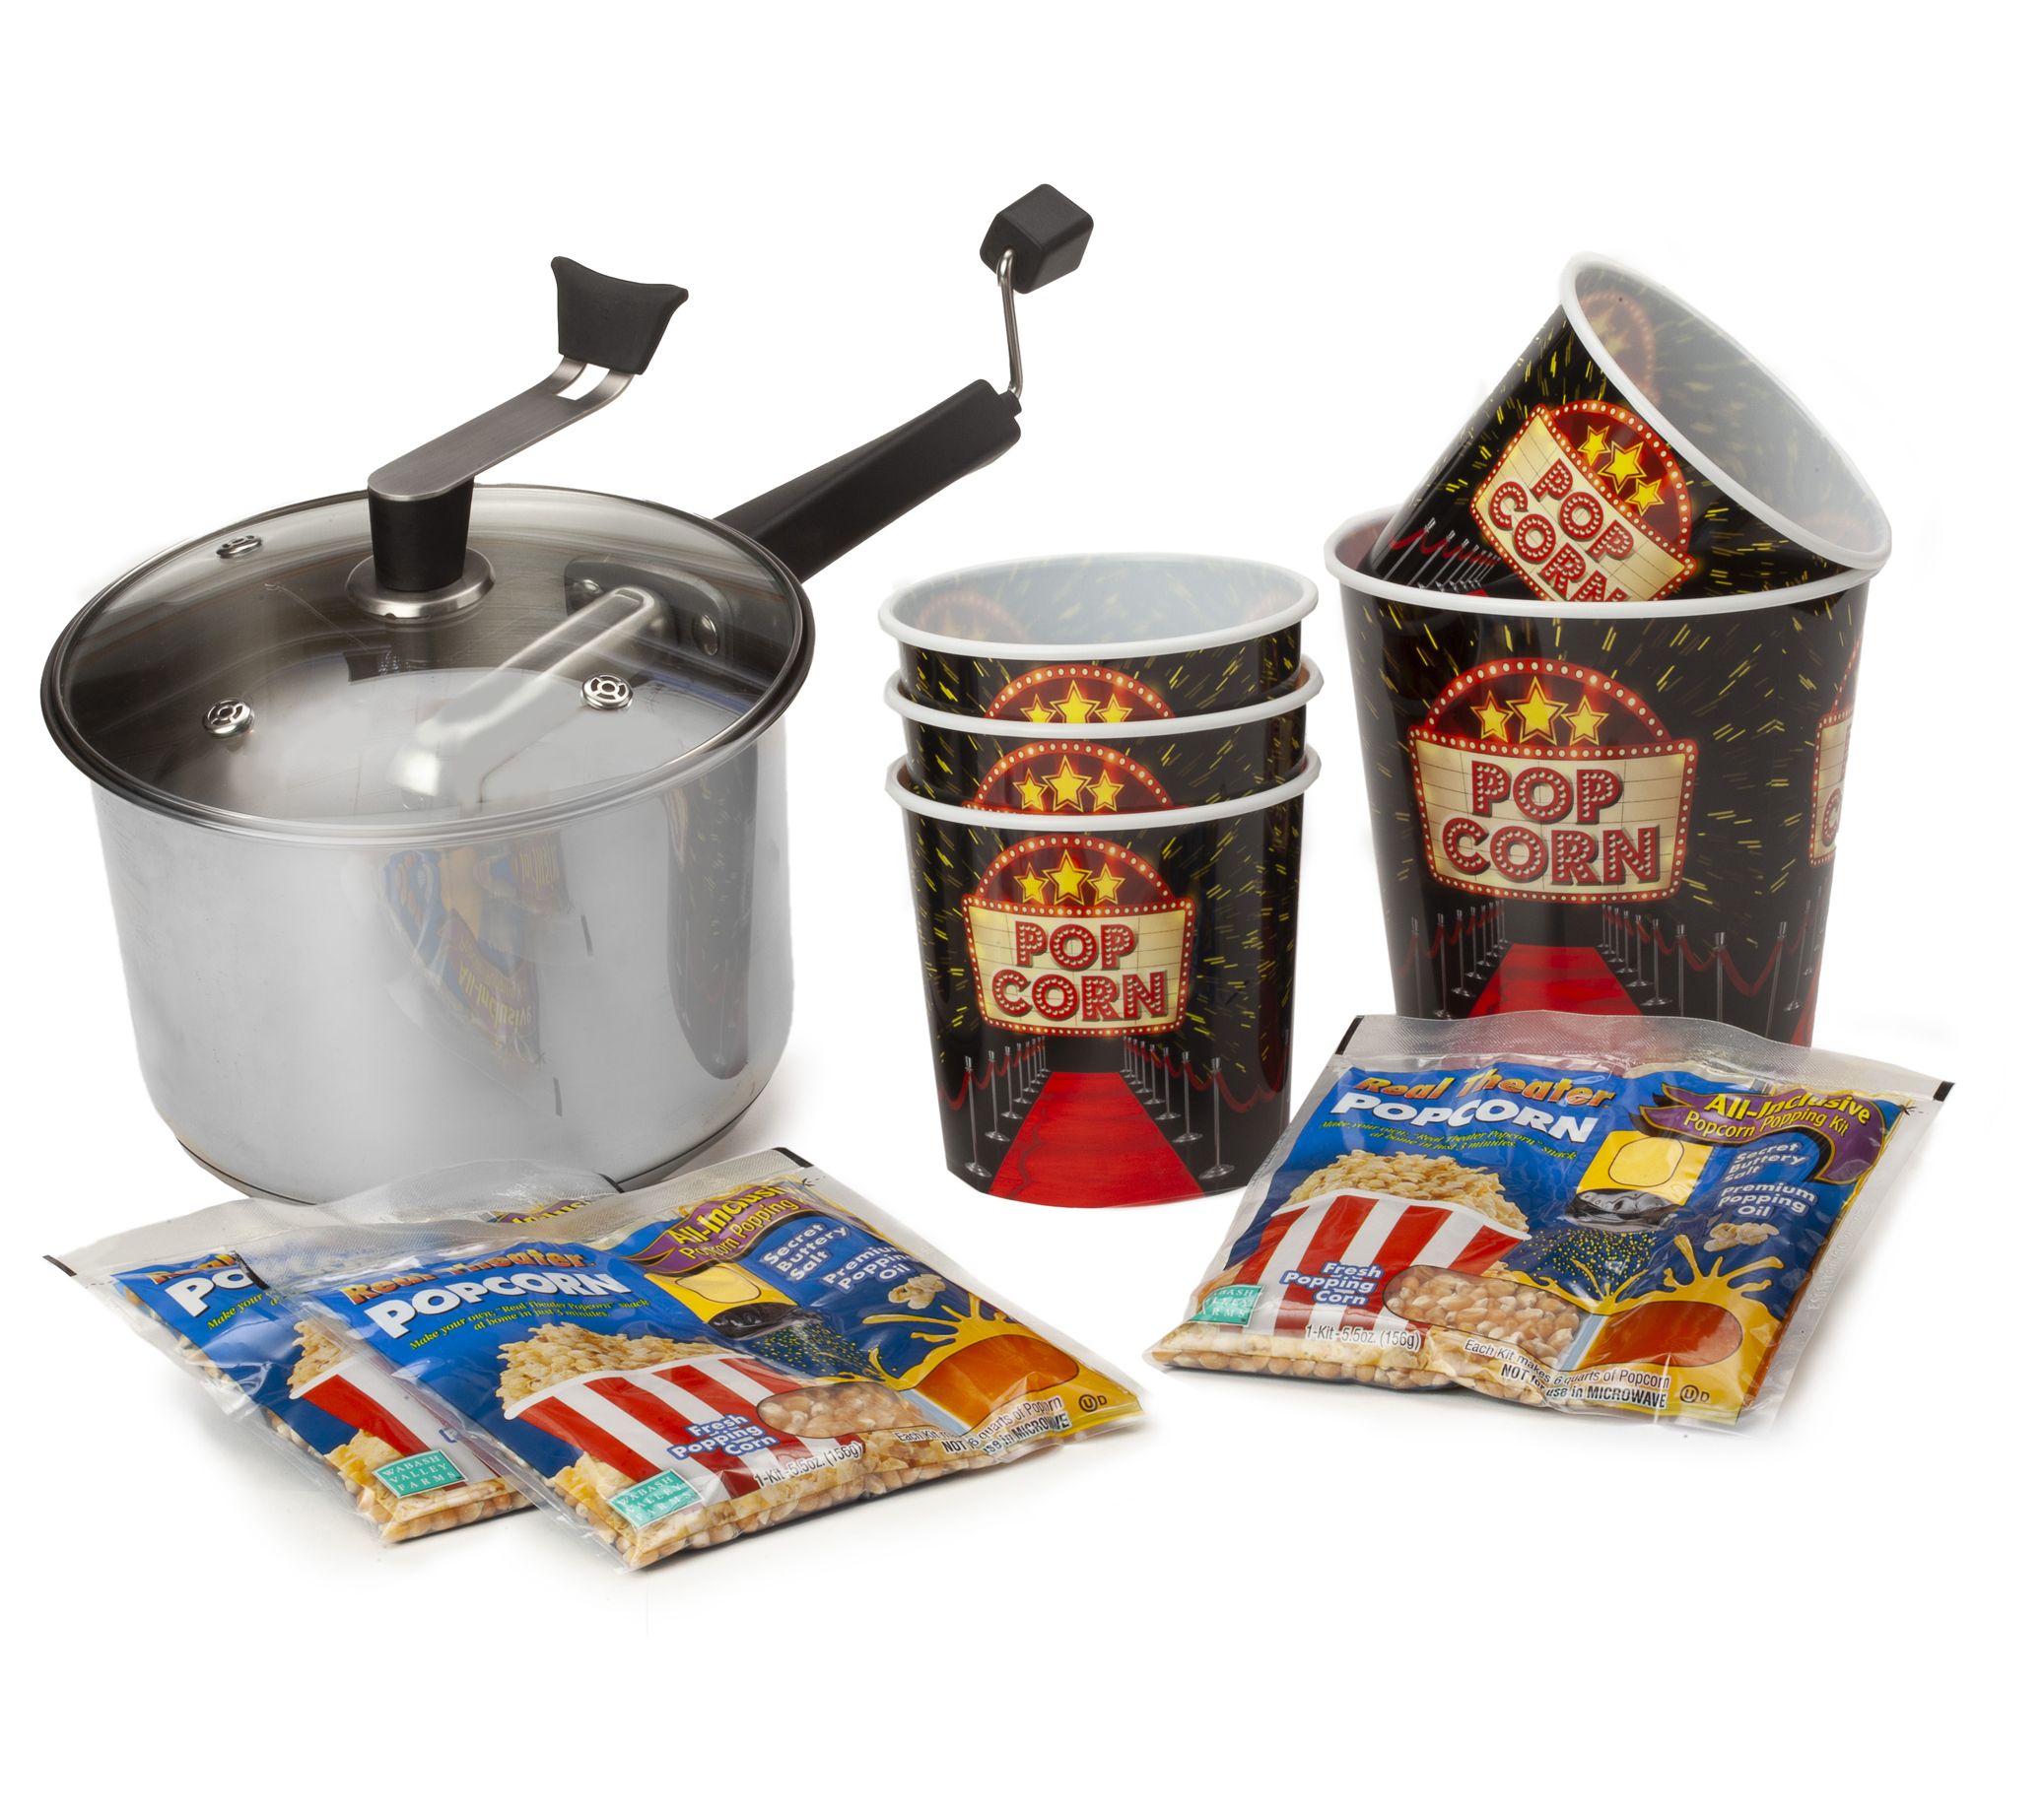 Wabash Valley Farms Stainless Steel Whirley-Pop Popcorn Maker with  Hull-less Kernels Kit